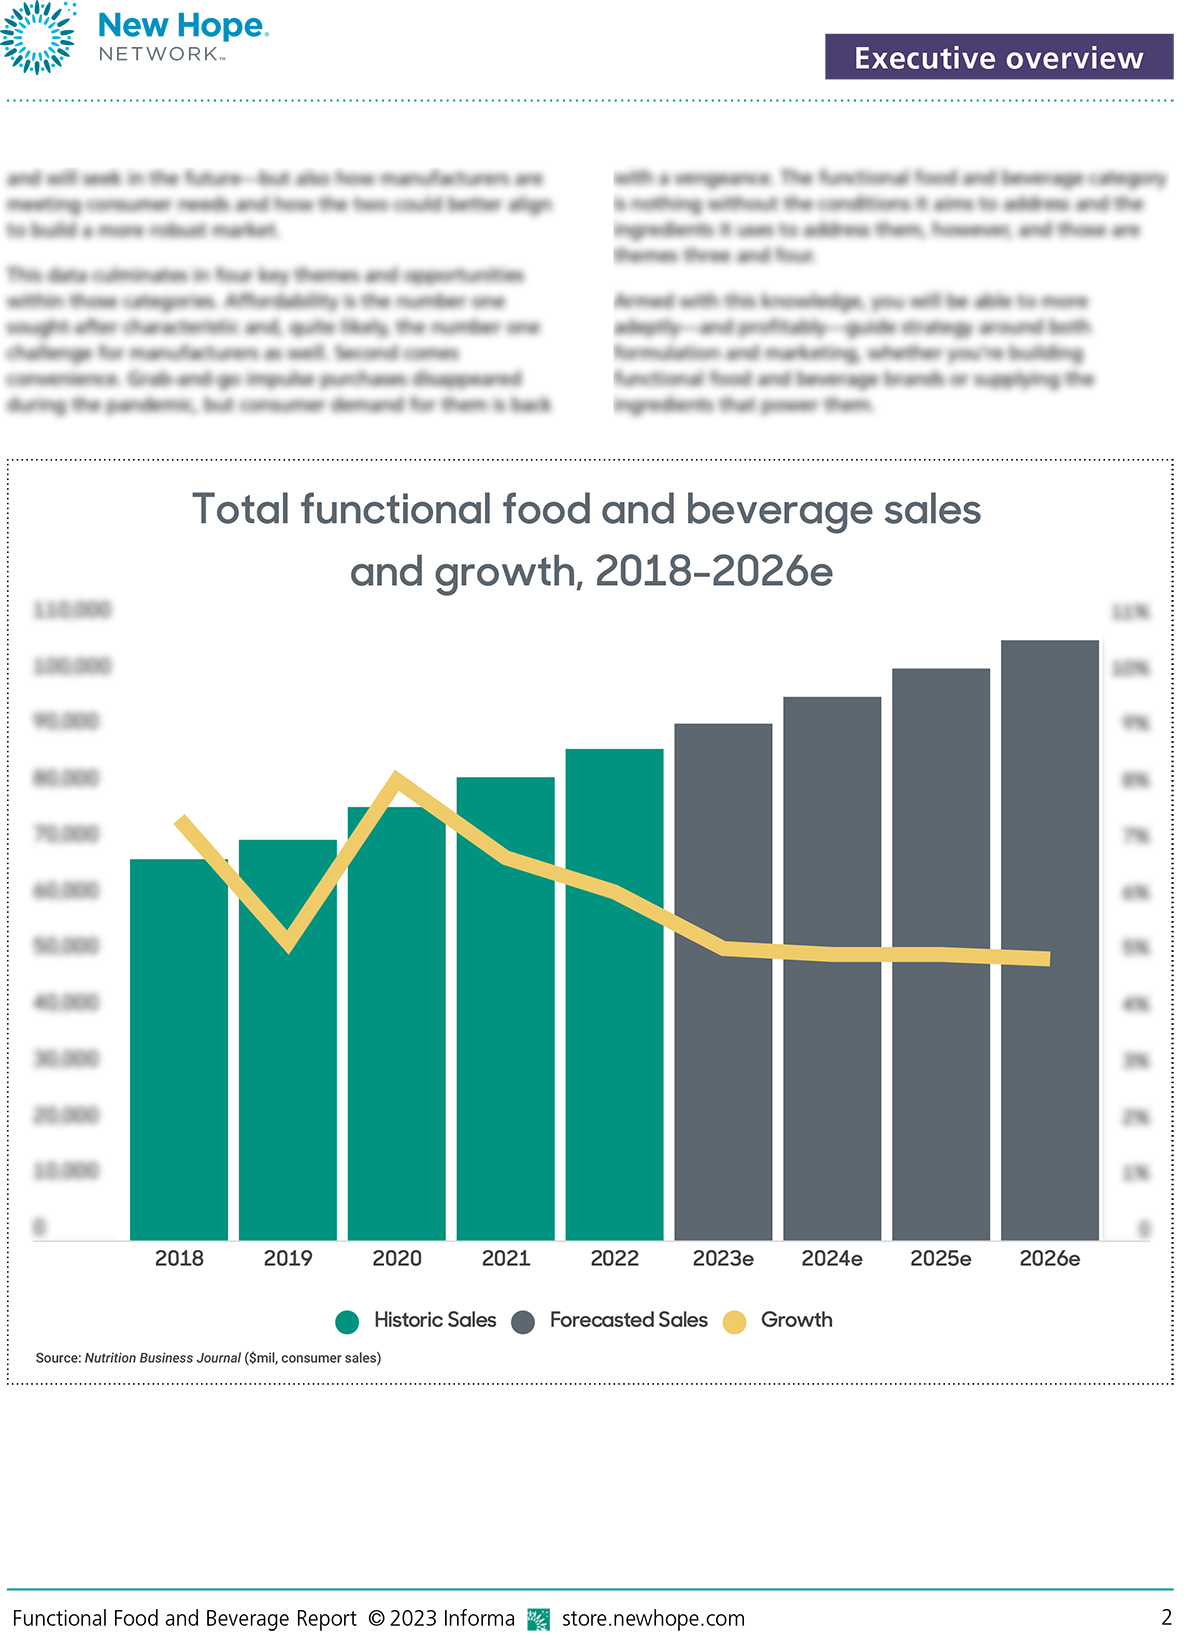 Total functional food and beverage sales and growth